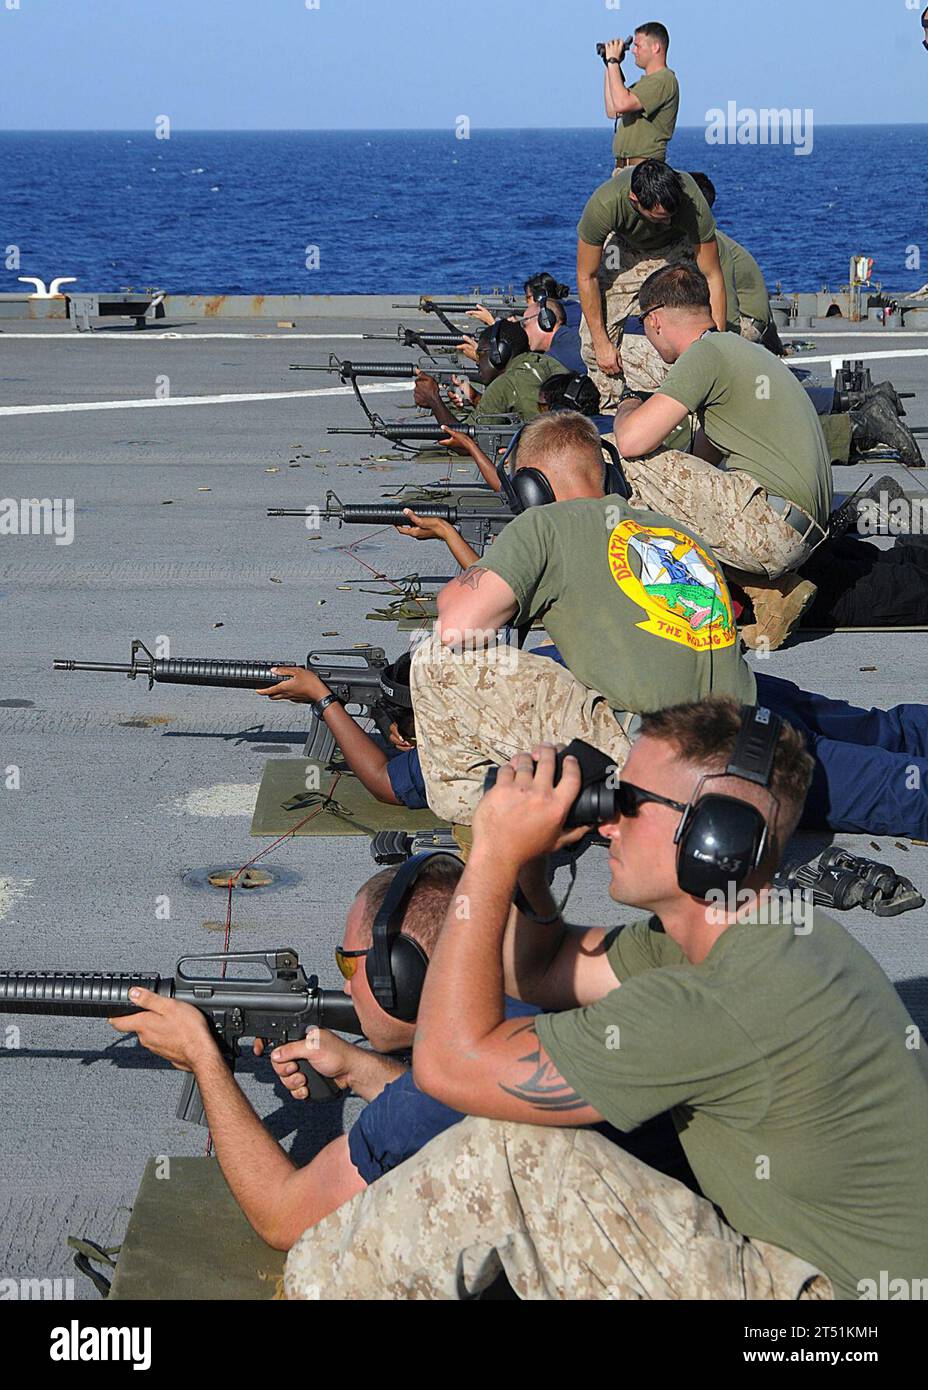 1005041082Z-032 U.S 5TH FLEET AREA OF RESPONSIBILITY (May 4, 2010) Marines assigned to the 24th Marine Expeditionary Unit (24th MEU) watch the downrange targets during an M16 service rifle live-fire training exercise for Sailors aboard the amphibious dock landing ship USS Ashland (LSD 48). Ashland is part of the Nassau Amphibious Ready Group and is supporting maritime security operations and theater security cooperation operations in the U.S. 5th Fleet area of responsibility. Navy Stock Photo